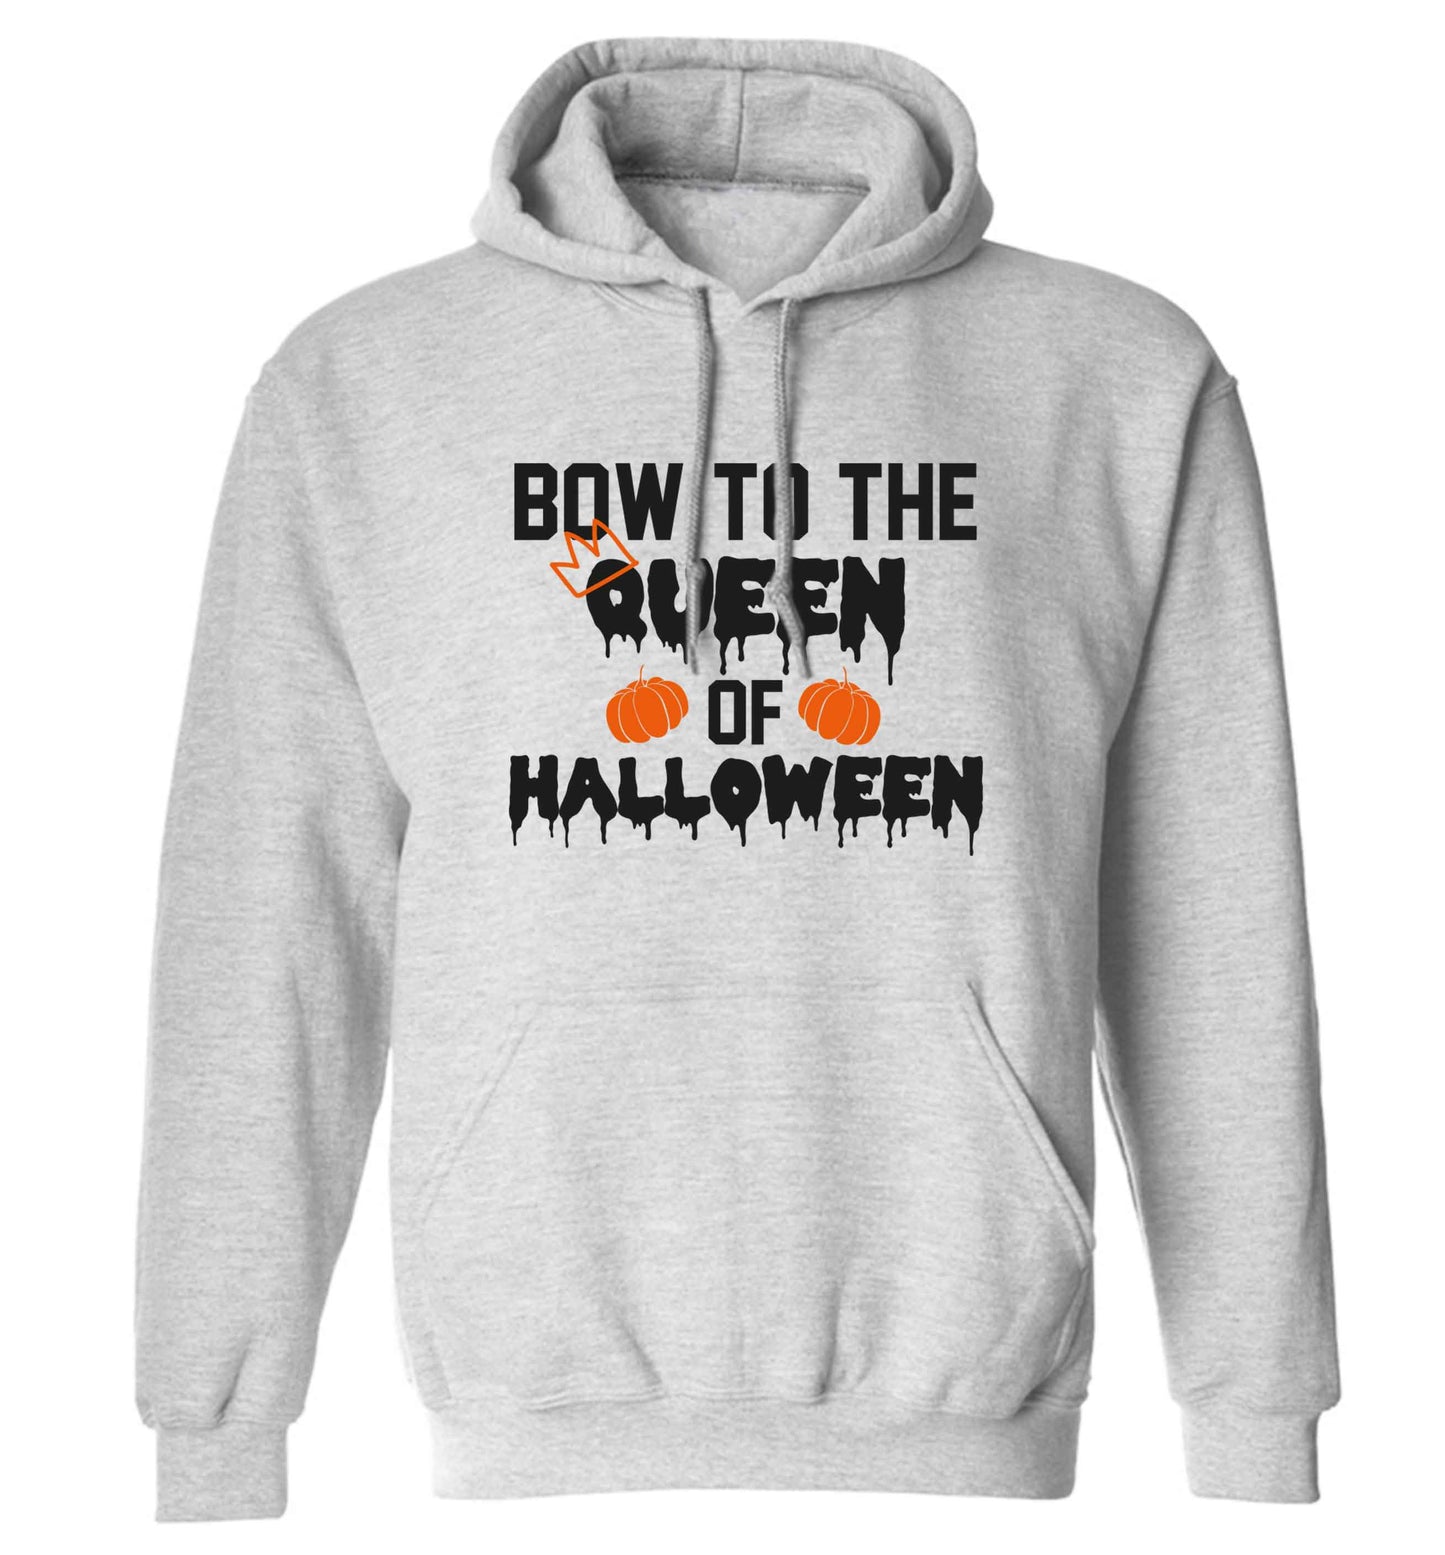 Bow to the Queen of halloween adults unisex grey hoodie 2XL